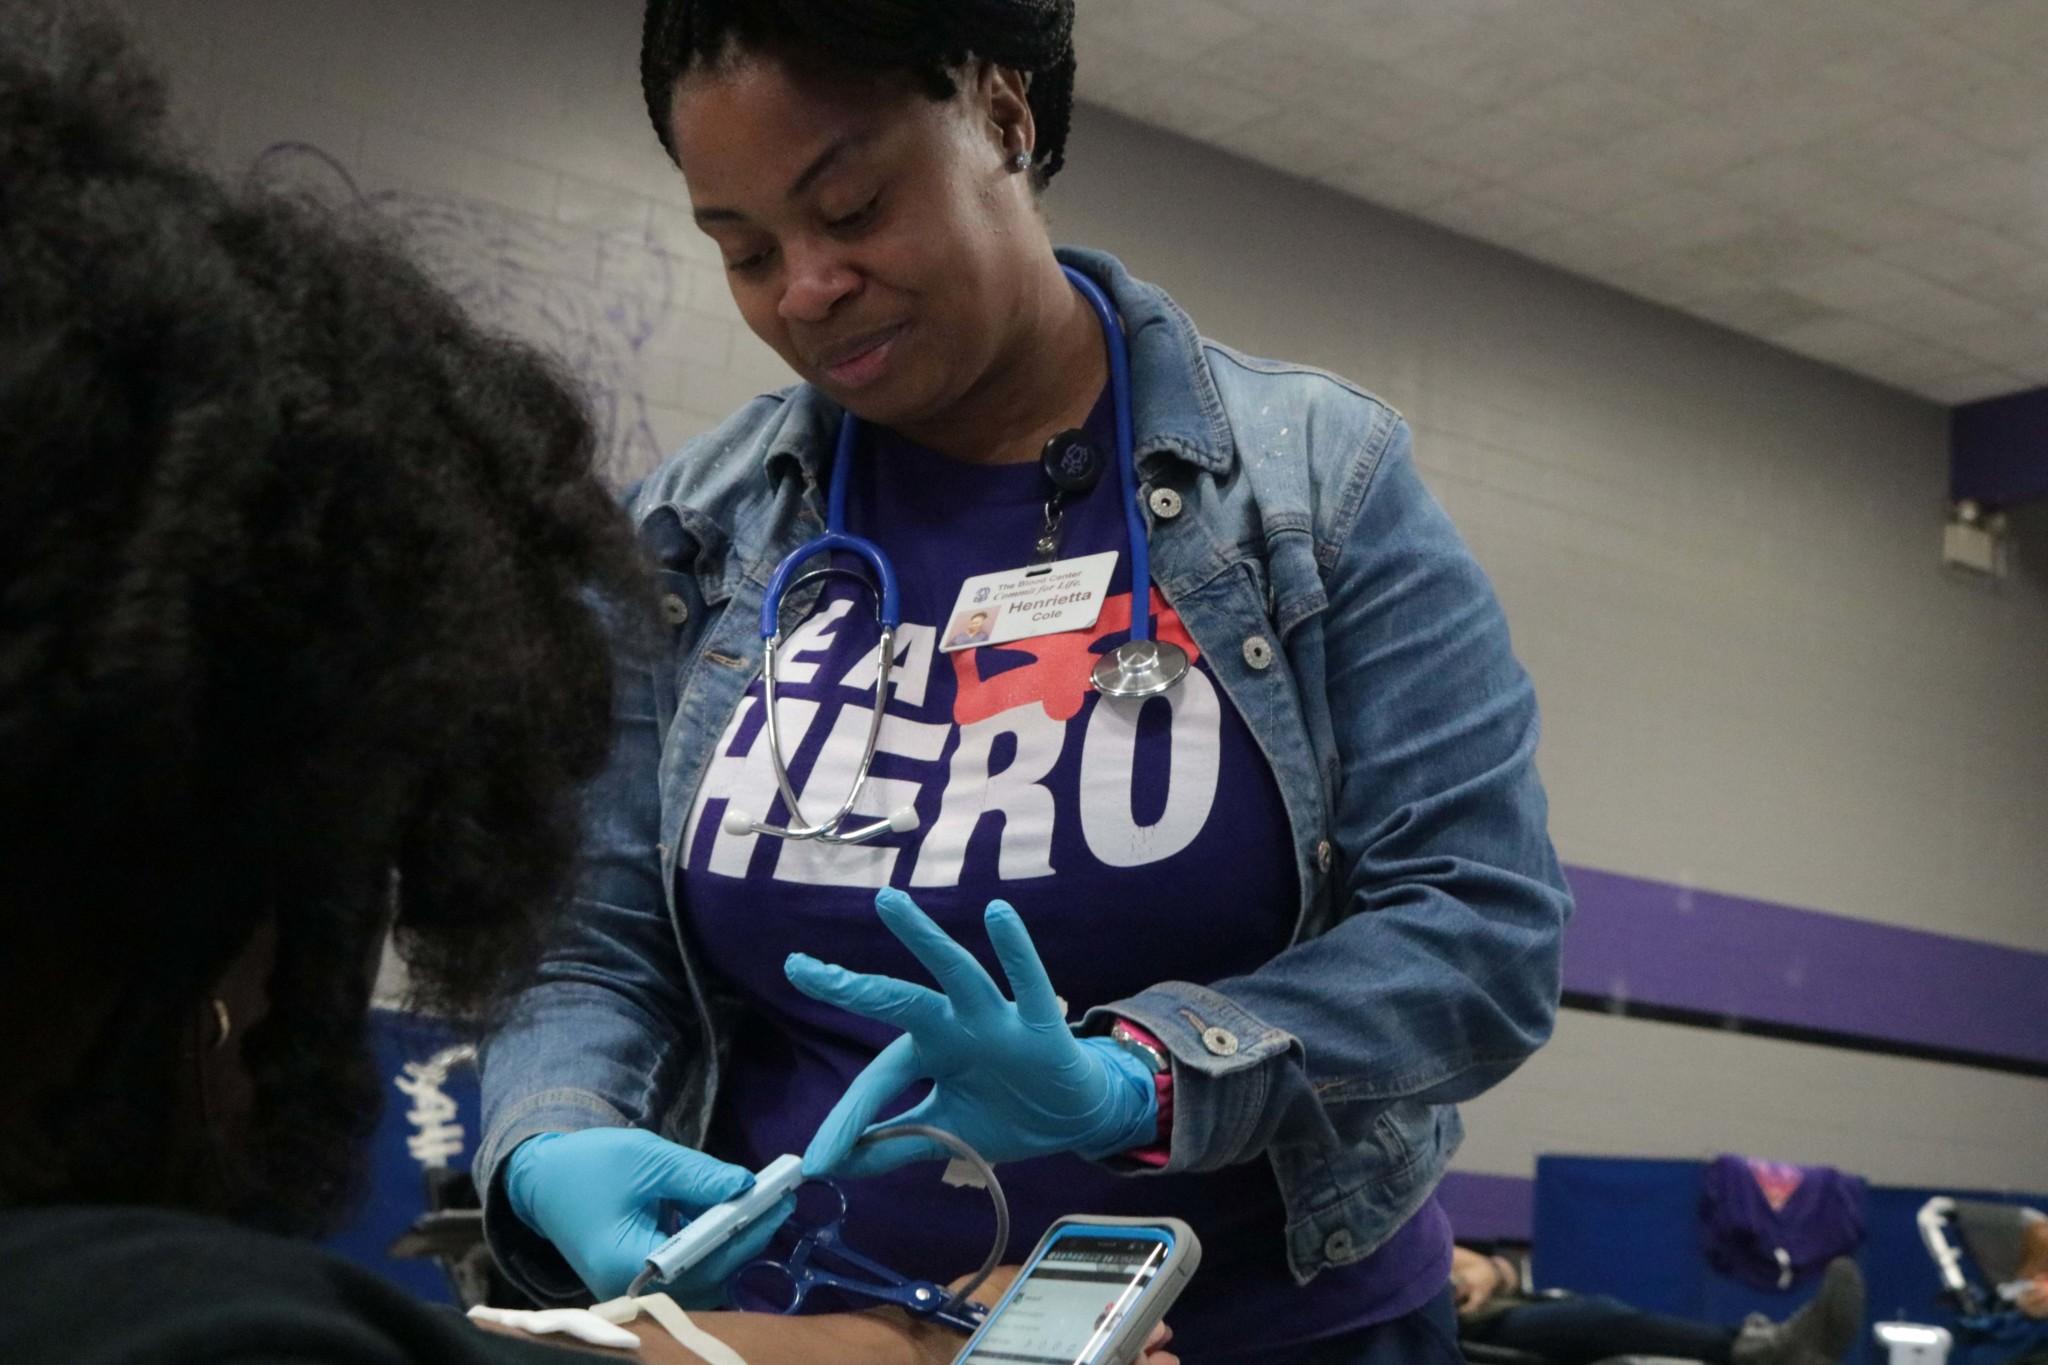 Henrietta Cole, the blood center phlebotomist, sticks needle into Dominique Carter’s arm to extract blood for the donations.